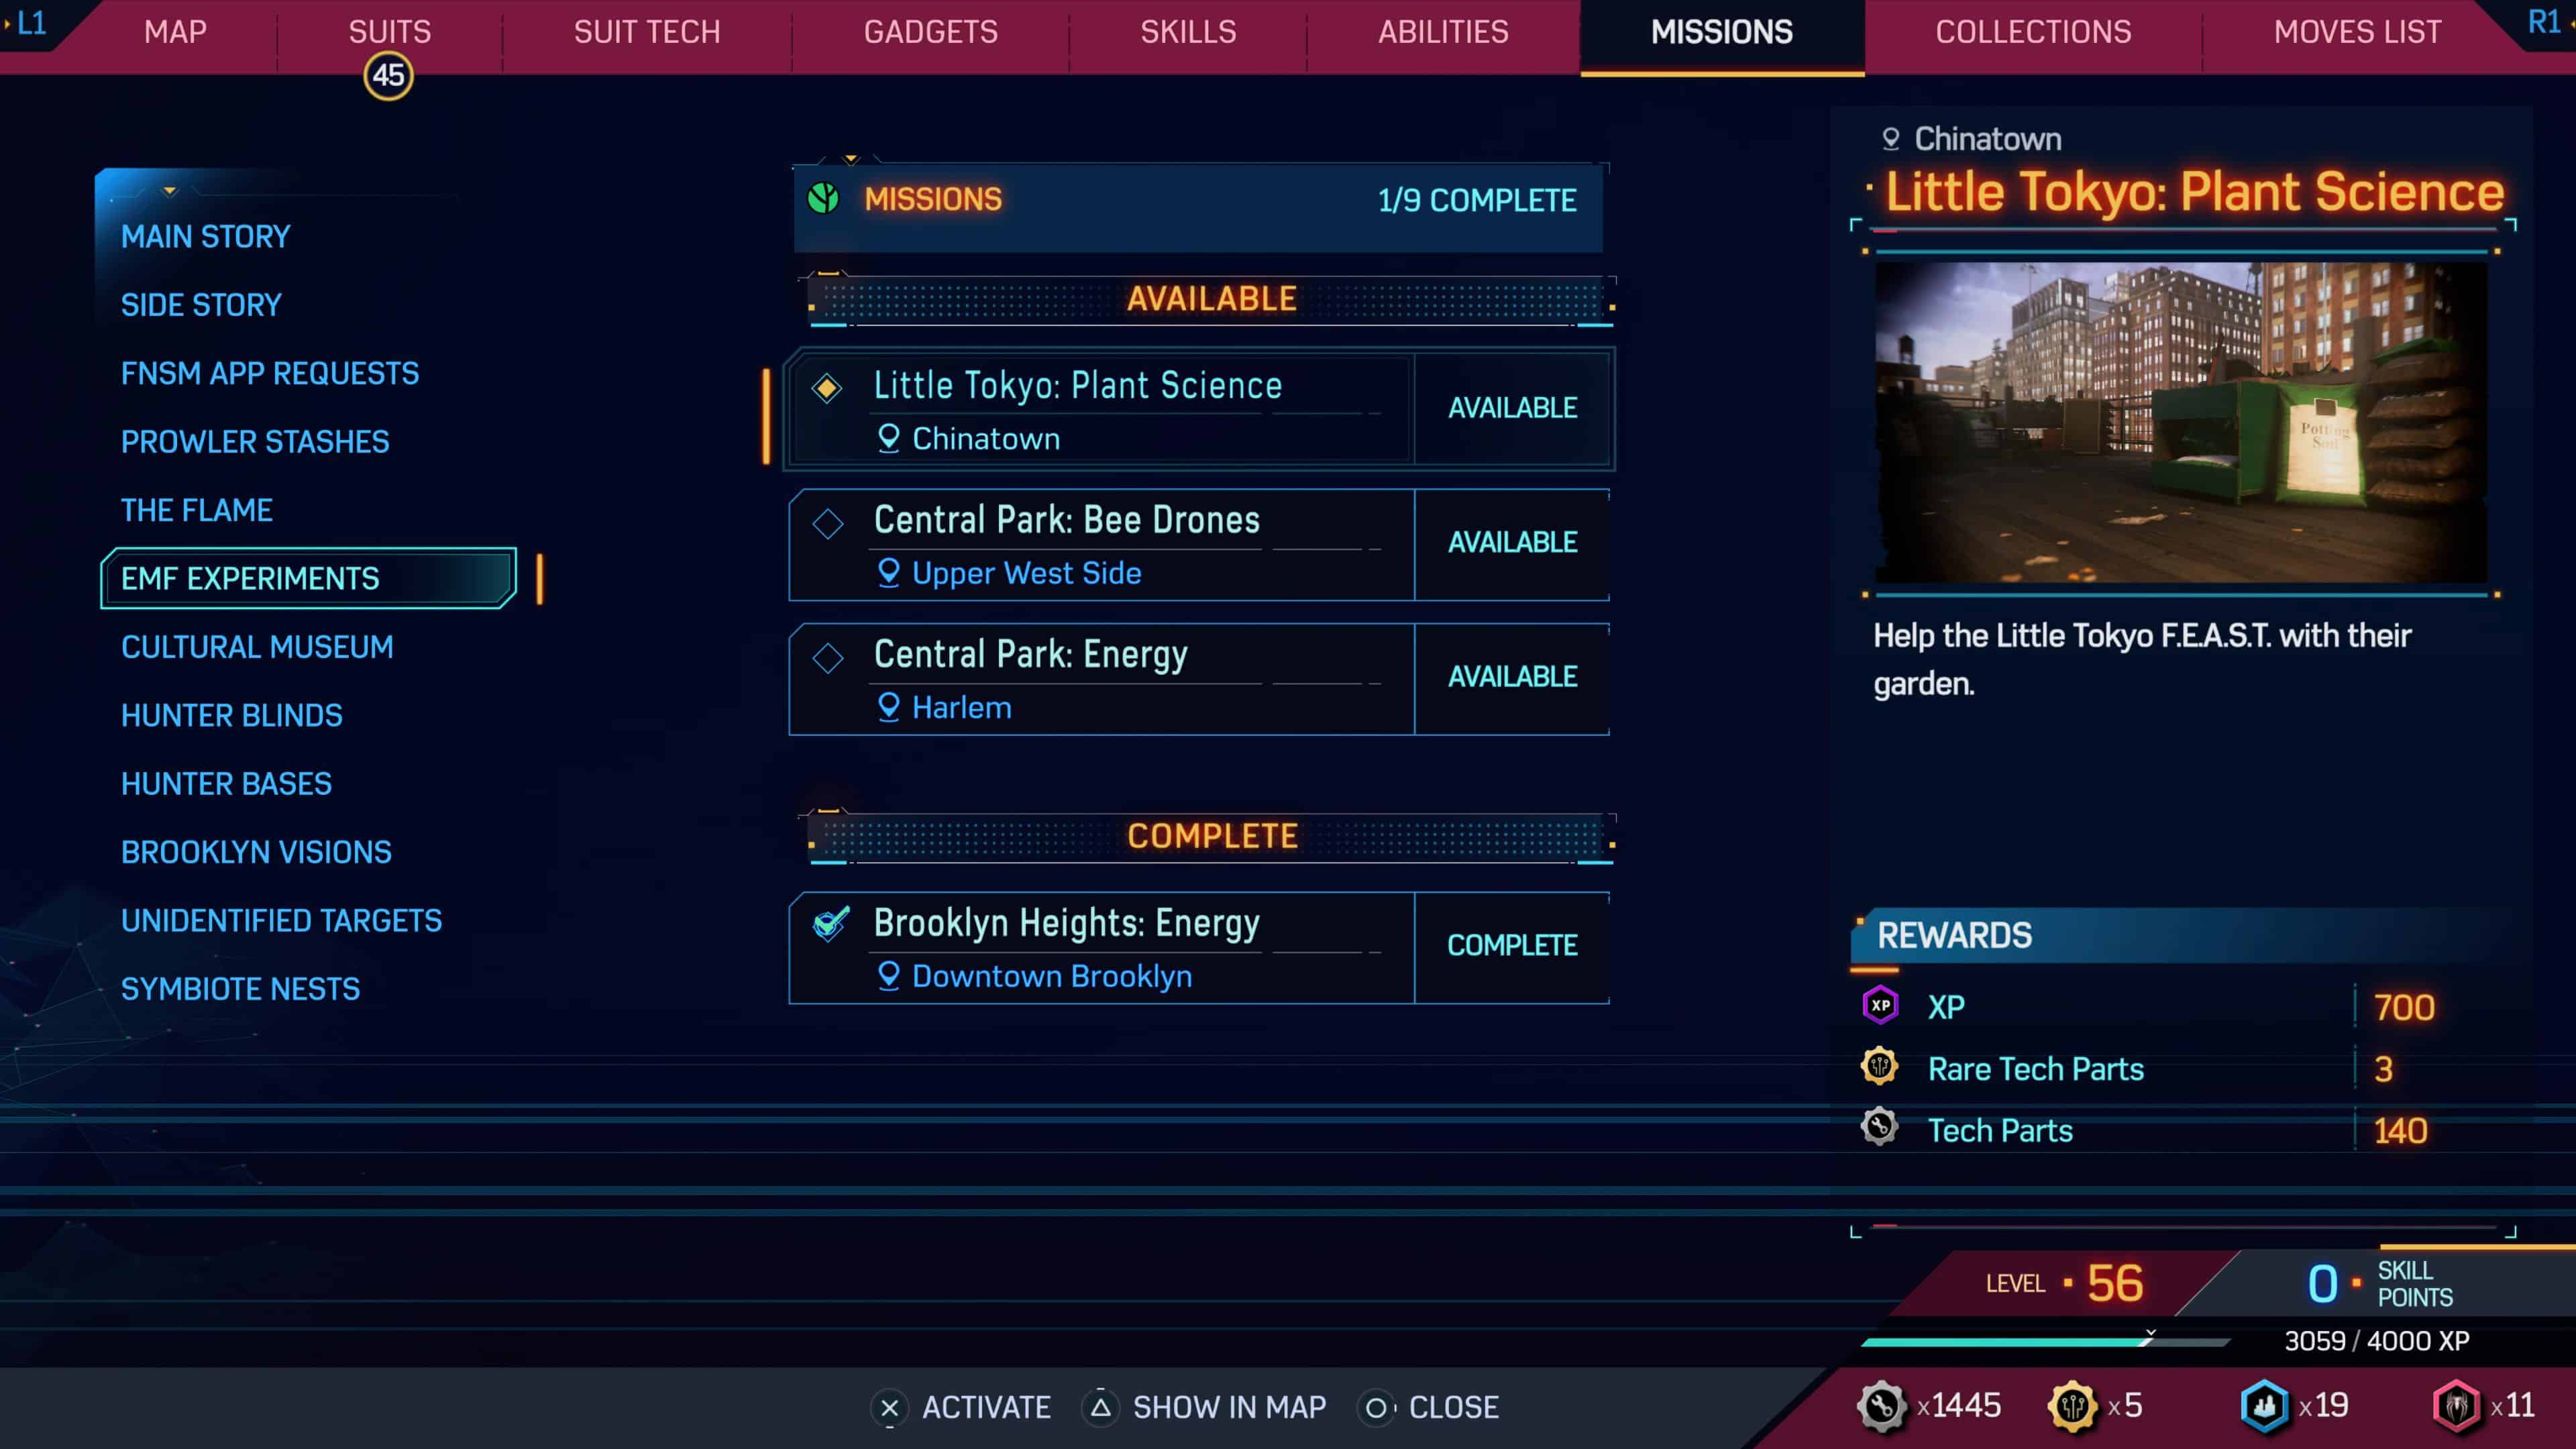 spider-man 2 screen shows tech parts rewarded from a quest.